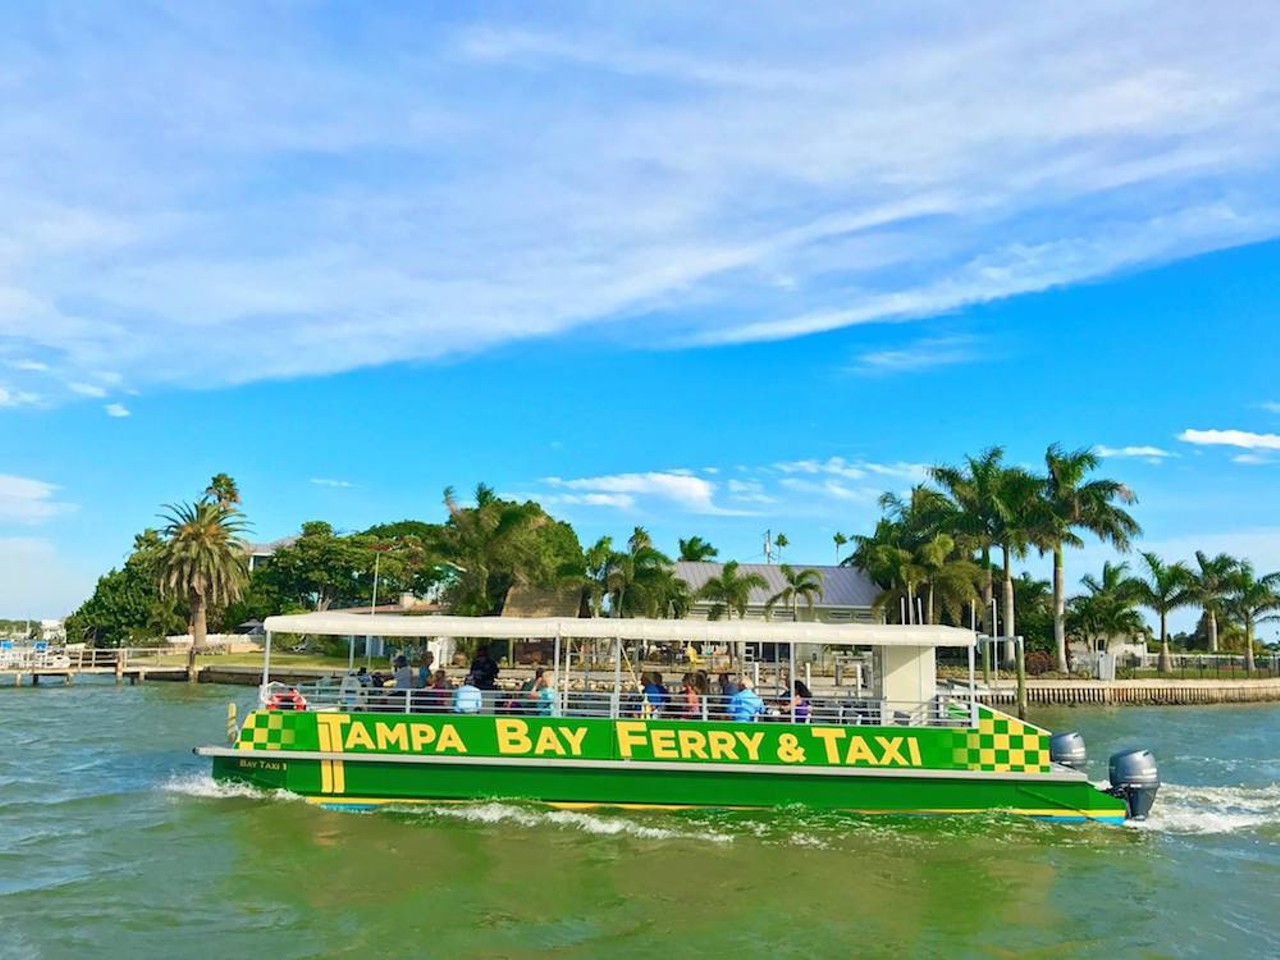 Take the ferry to Egmont Key State Park from Fort DeSoto
170 Johns Pass Boardwalk, Madeira Beach, 727–393-1947
Egmont Key State Park invites visitors to explore its large nature preserve and Fort Dade, a large fort dating back to the Spanish-American War that covers expansive areas of the island. With unique opportunities for shelling, swimming and snorkeling, there’s an adventure for everyone. The ferry takes only an hour from dock to dock, offering over three hours to explore the park.  
Photo via Hubbard’s Marina/Facebook